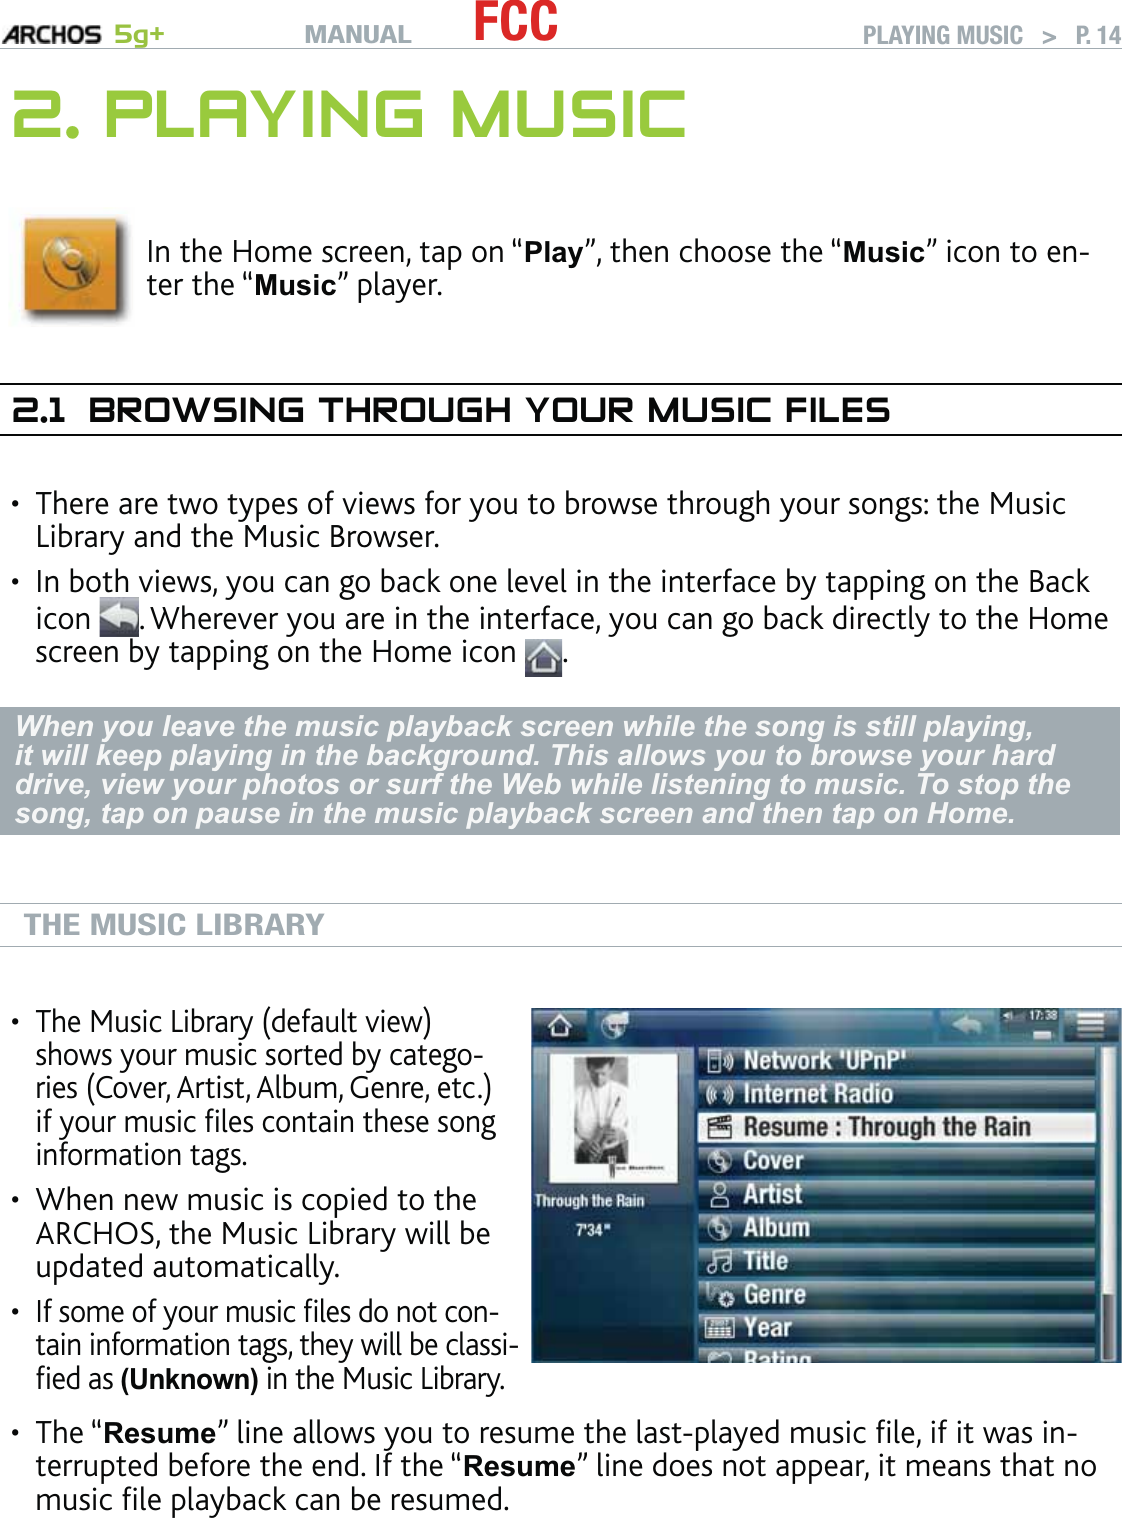 MANUAL 5g+ FCC PLAYING MUSIC   &gt;   P. 142. PLAYING MUSICIn the Home screen, tap on “Play”, then choose the “Music” icon to en-ter the “Music” player.2.1  BROWSING THROUGH YOUR MUSIC FILESThere are two types of views for you to browse through your songs: the Music Library and the Music Browser.In both views, you can go back one level in the interface by tapping on the Back icon  . Wherever you are in the interface, you can go back directly to the Home screen by tapping on the Home icon  .When you leave the music playback screen while the song is still playing, it will keep playing in the background. This allows you to browse your hard drive, view your photos or surf the Web while listening to music. To stop the song, tap on pause in the music playback screen and then tap on Home.THE MUSIC LIBRARYThe Music Library (default view) shows your music sorted by catego-ries (Cover, Artist, Album, Genre, etc.) if your music ﬁles contain these song information tags.When new music is copied to the ARCHOS, the Music Library will be updated automatically.If some of your music ﬁles do not con-tain information tags, they will be classi-ﬁed as (Unknown) in the Music Library.•••The “Resume” line allows you to resume the last-played music ﬁle, if it was in-terrupted before the end. If the “Resume” line does not appear, it means that no music ﬁle playback can be resumed.•••